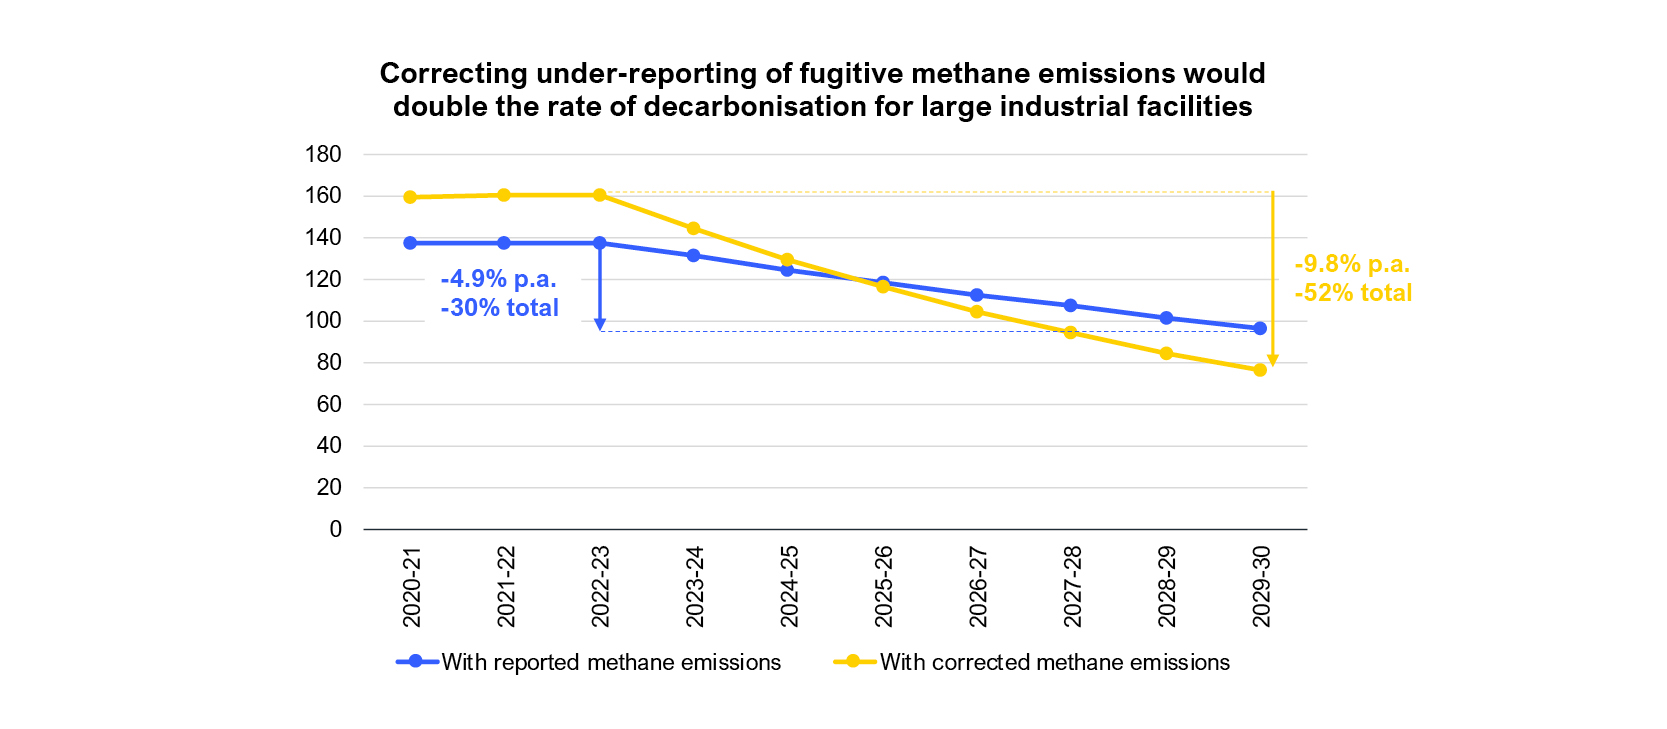 Under-reporting of fugitive methane emissions